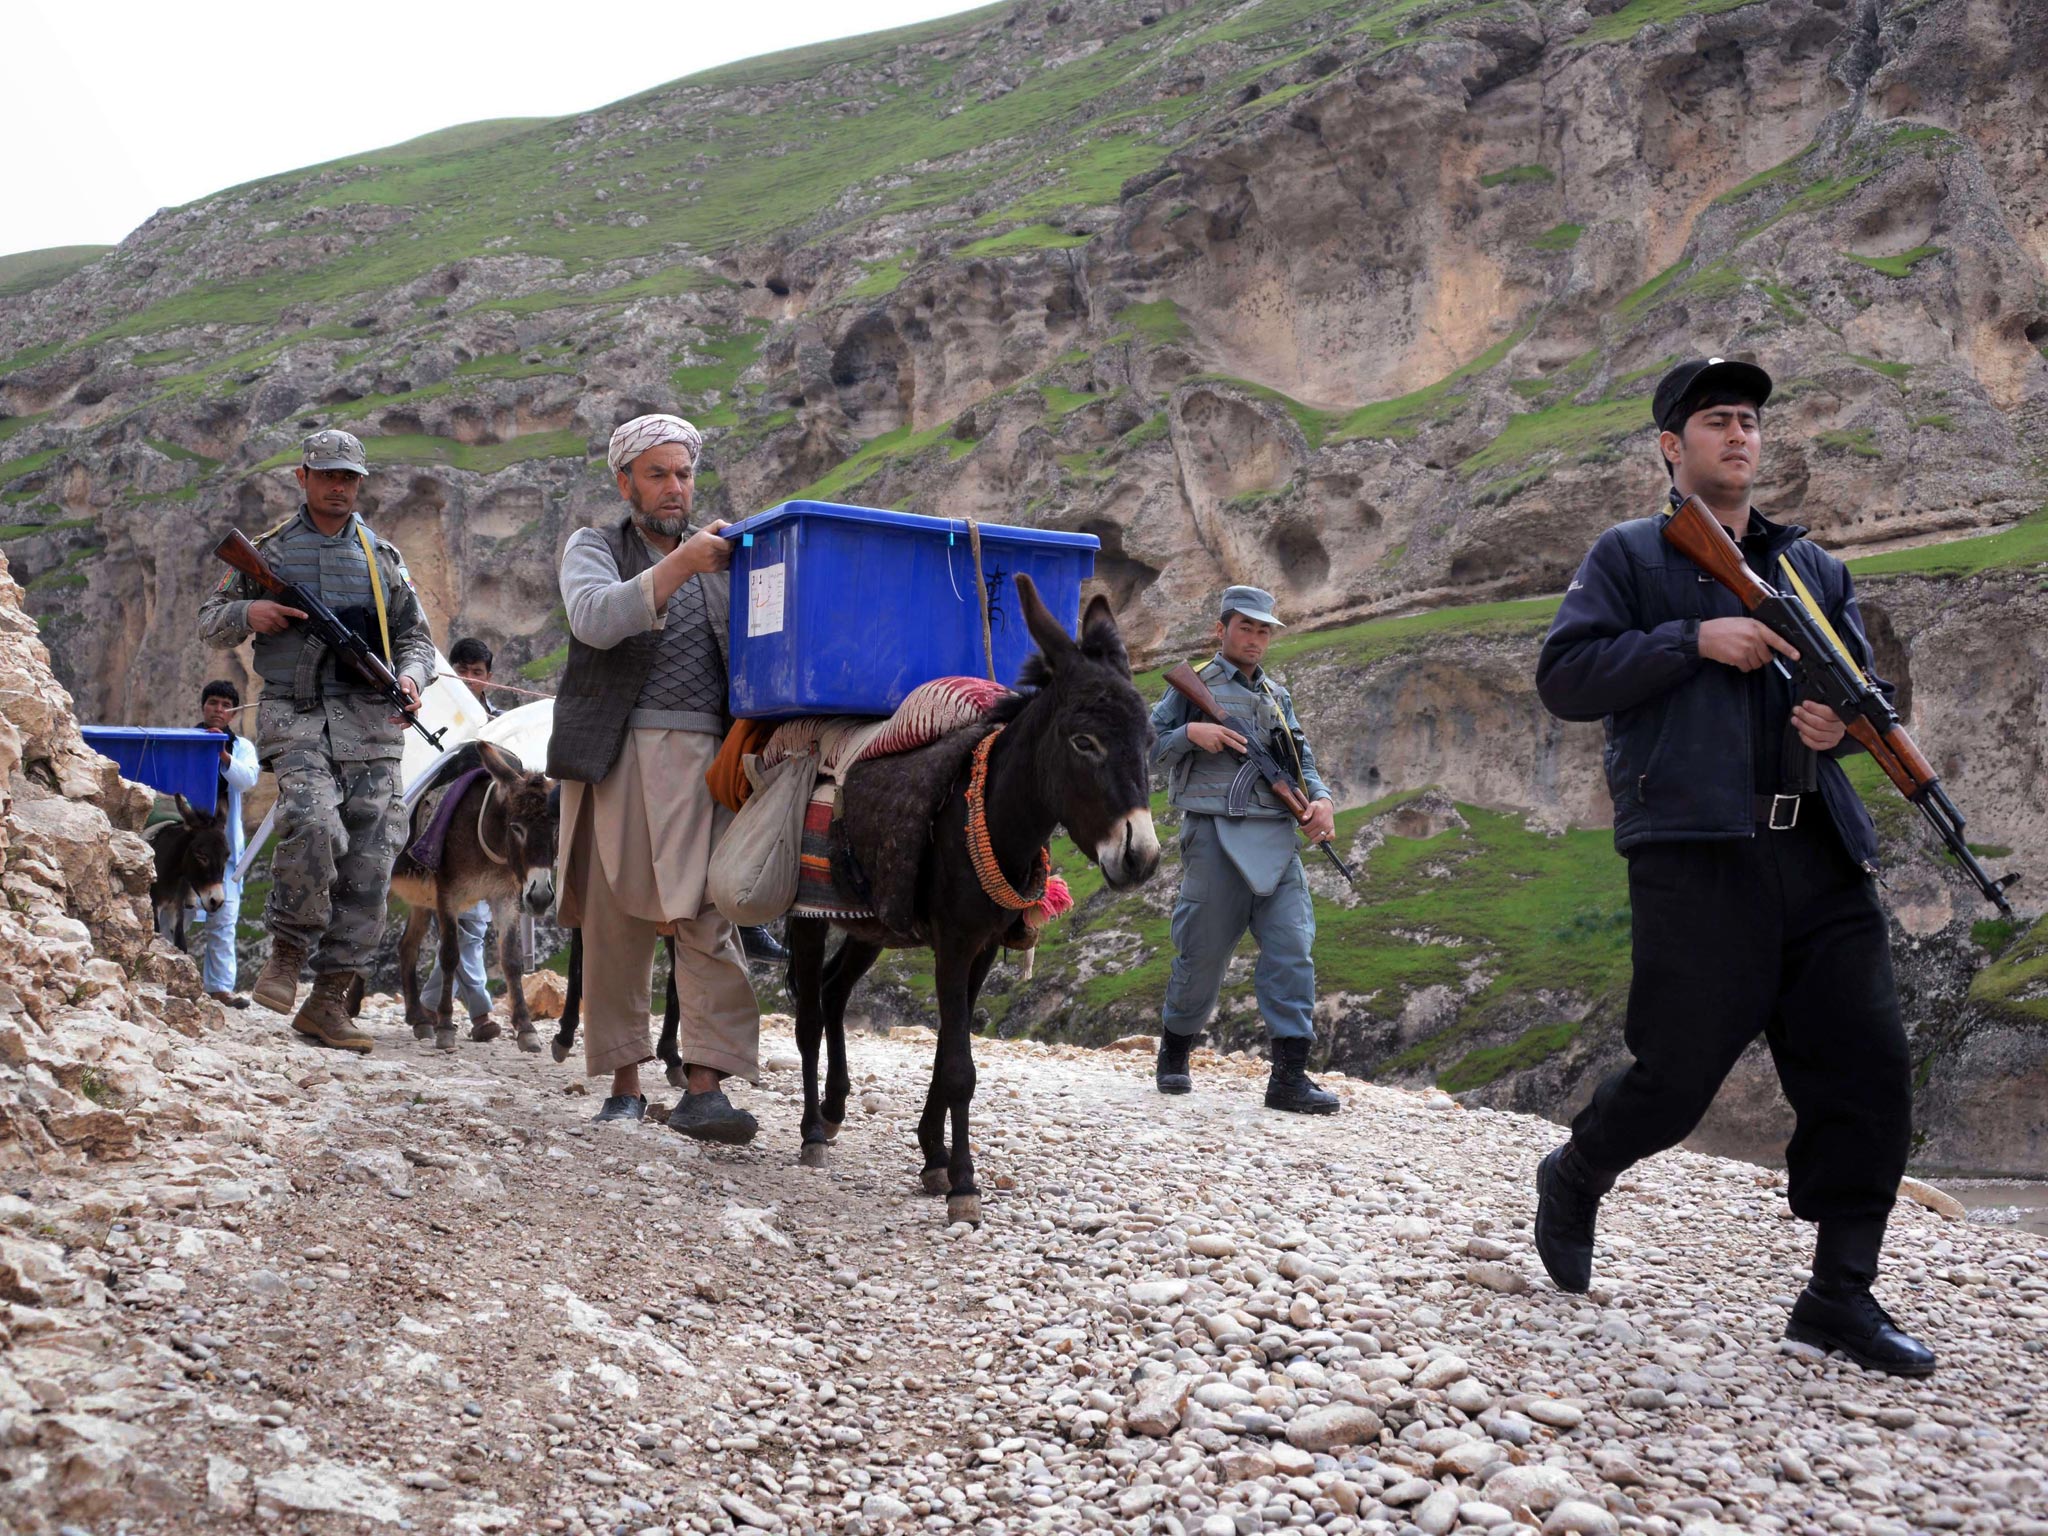 Afghan election workers are escorted by armed policemen as they transport election materials and ballot boxes to remote polling stations in Balkh Province this week